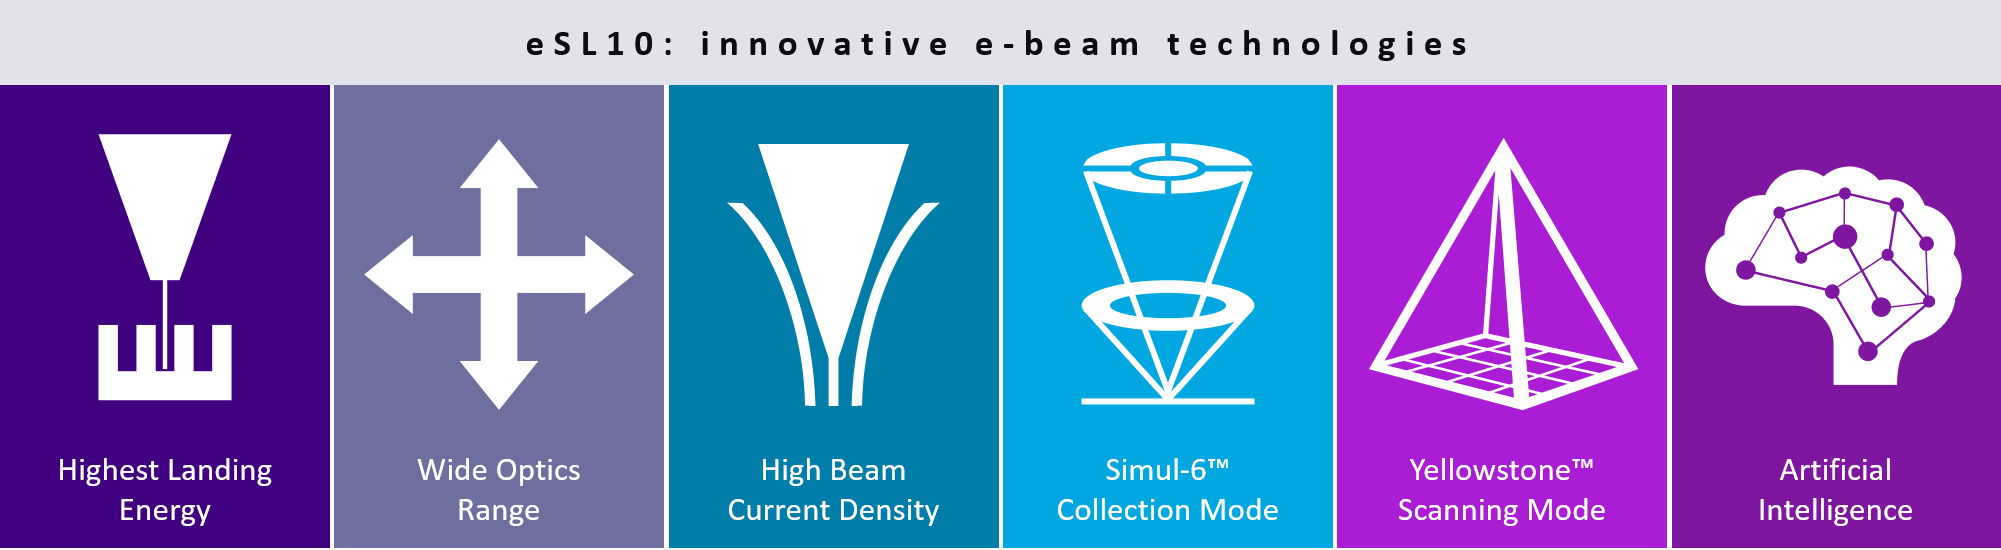 The eSL10 e-beam inspection system features multiple innovative technologies that enable capture of critical defects.